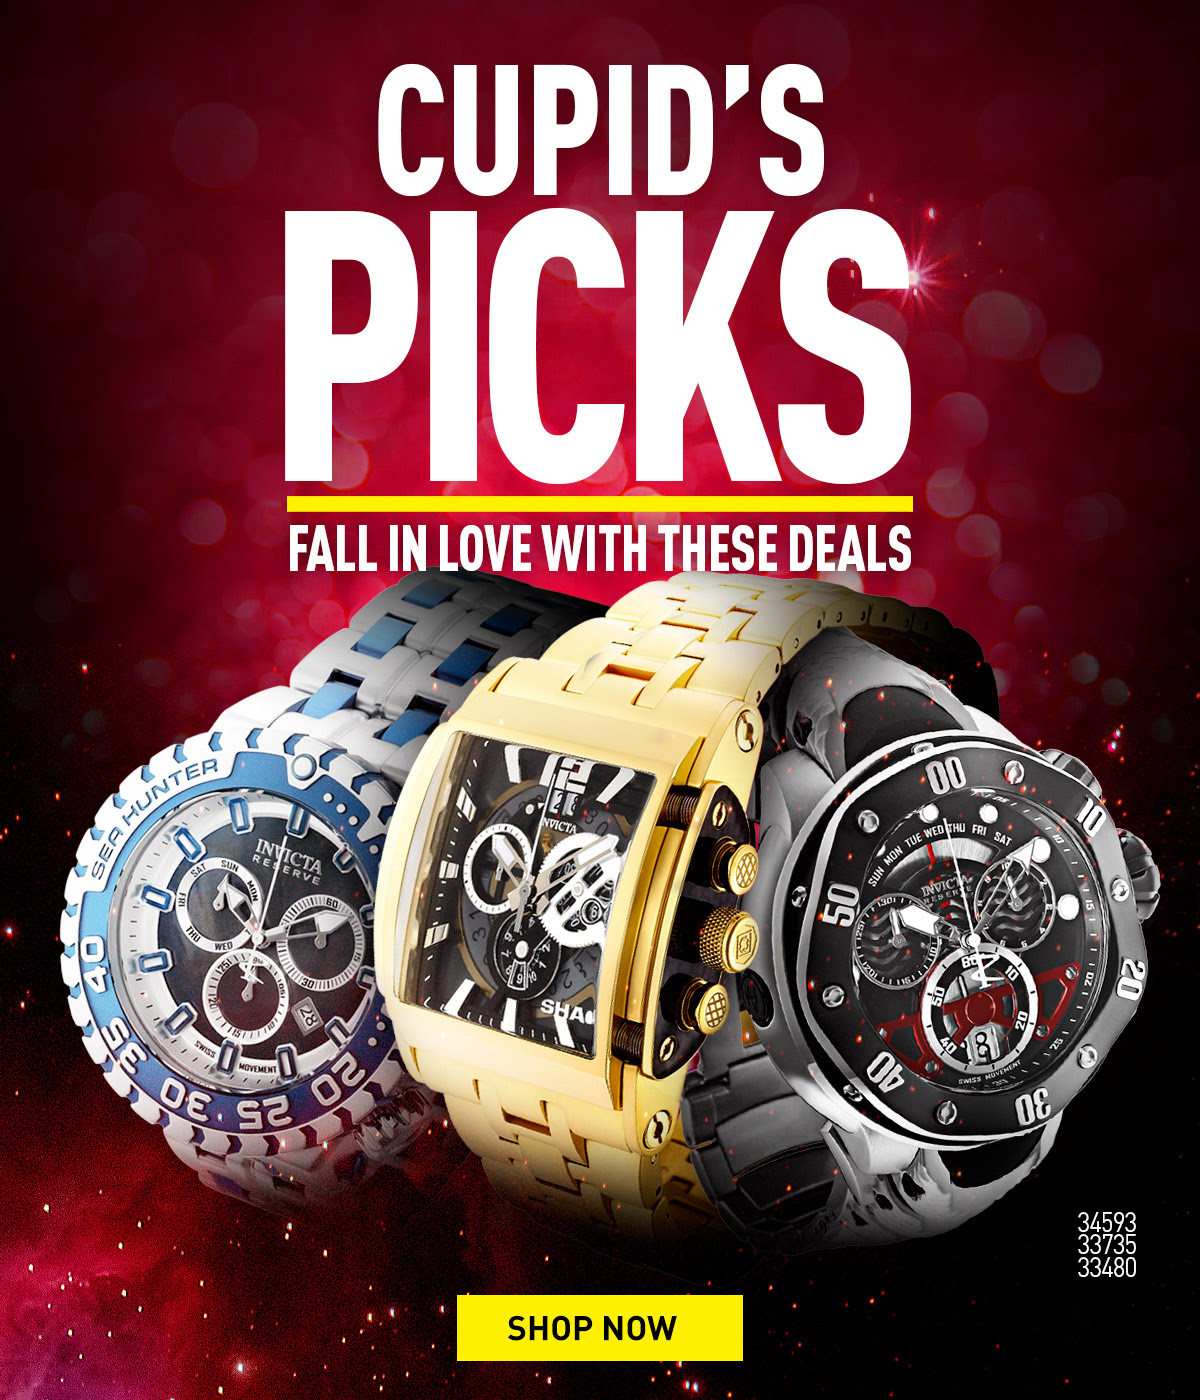 Cupid's Pick! Fall in love with these deals!